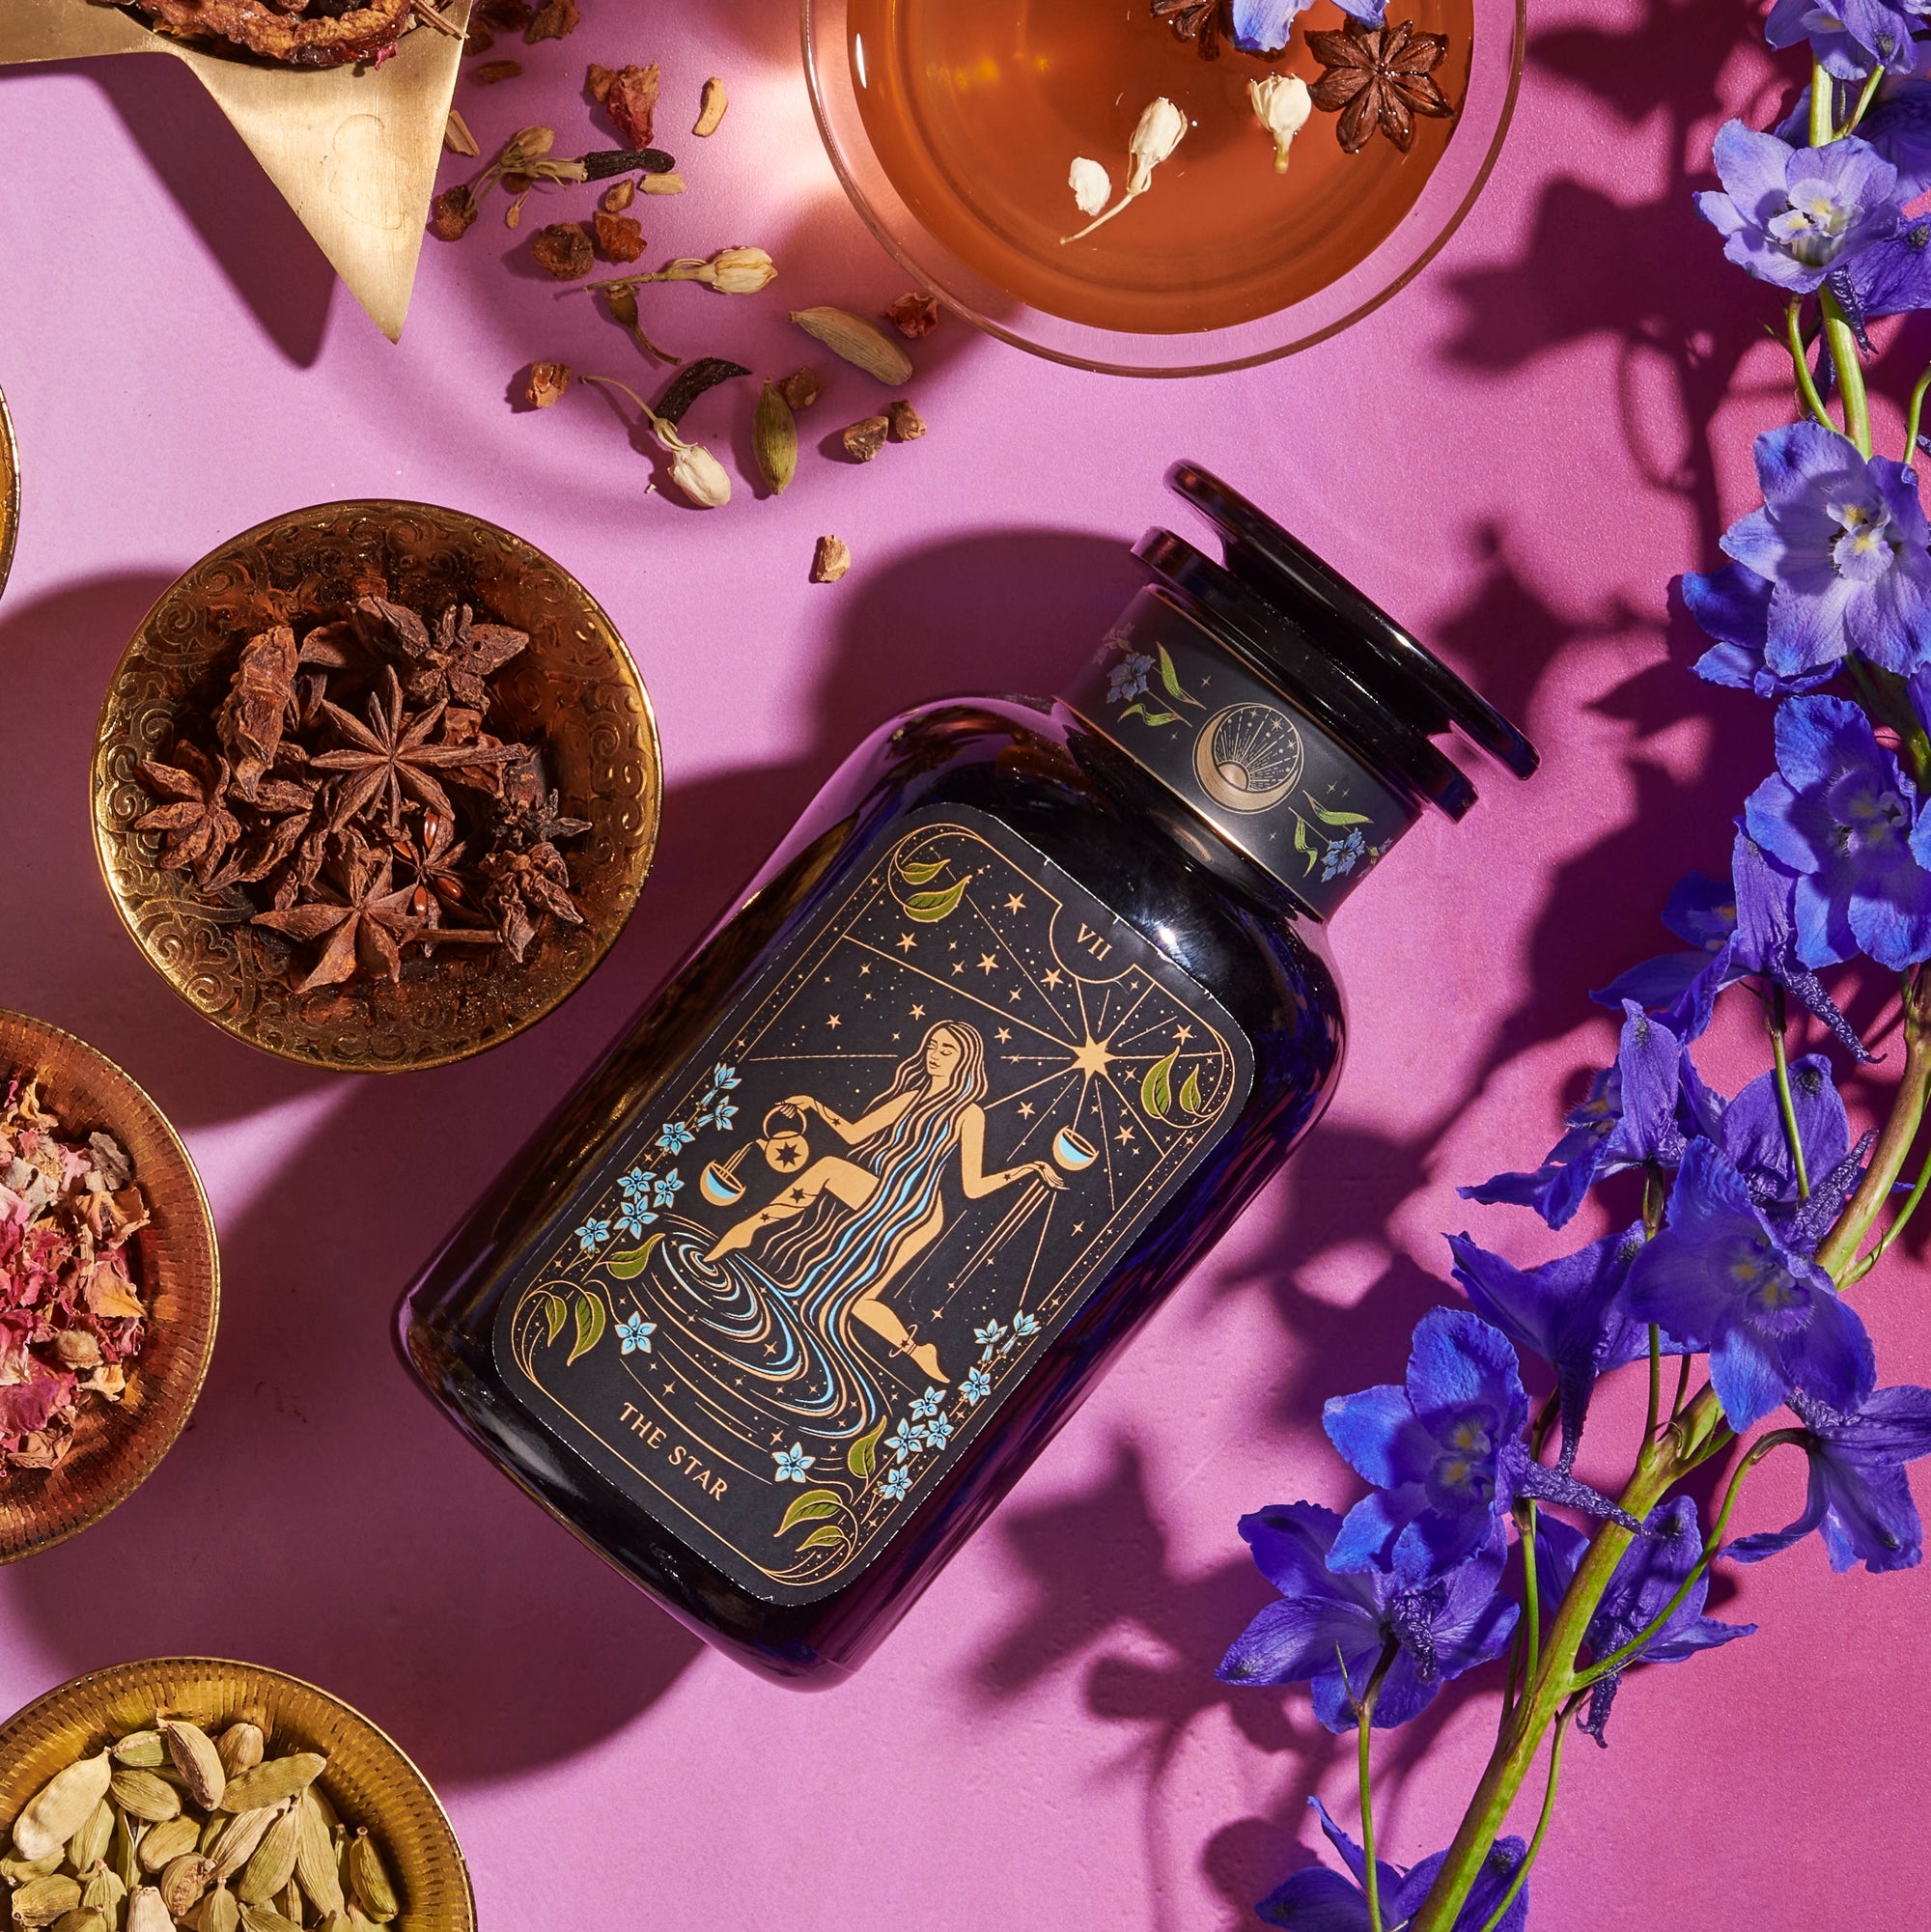 A decorative glass bottle labeled "The Star" lies on a pink surface, surrounded by vibrant blue flowers and bowls filled with dried herbs and spices. A small golden ladle and a steaming cup of Monthly Magic First Sips Tea Subscription Box by Magic Hour complete the enchanting composition.